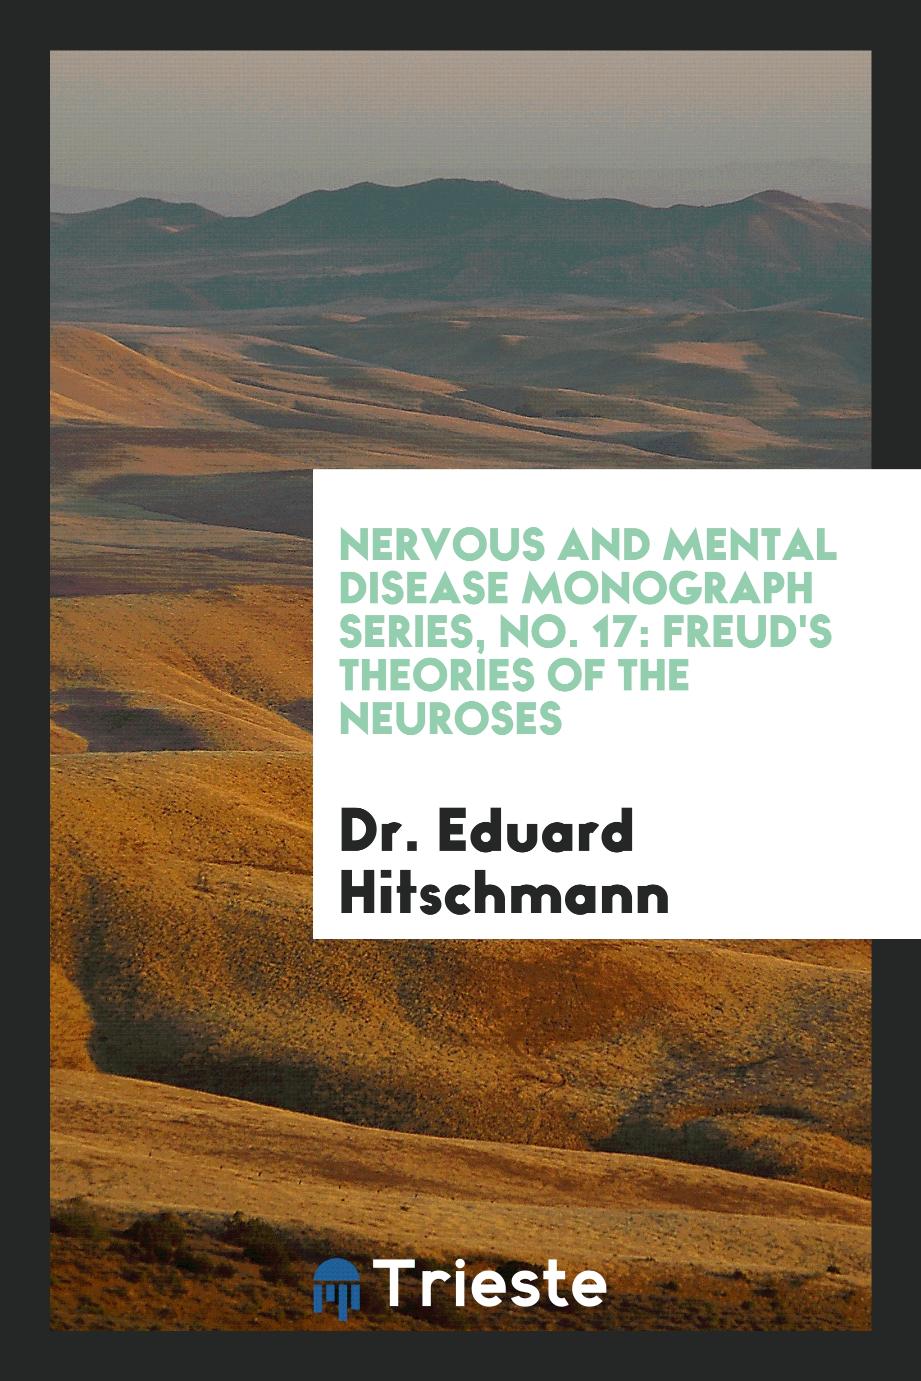 Nervous and Mental Disease Monograph Series, No. 17: Freud's Theories of the Neuroses